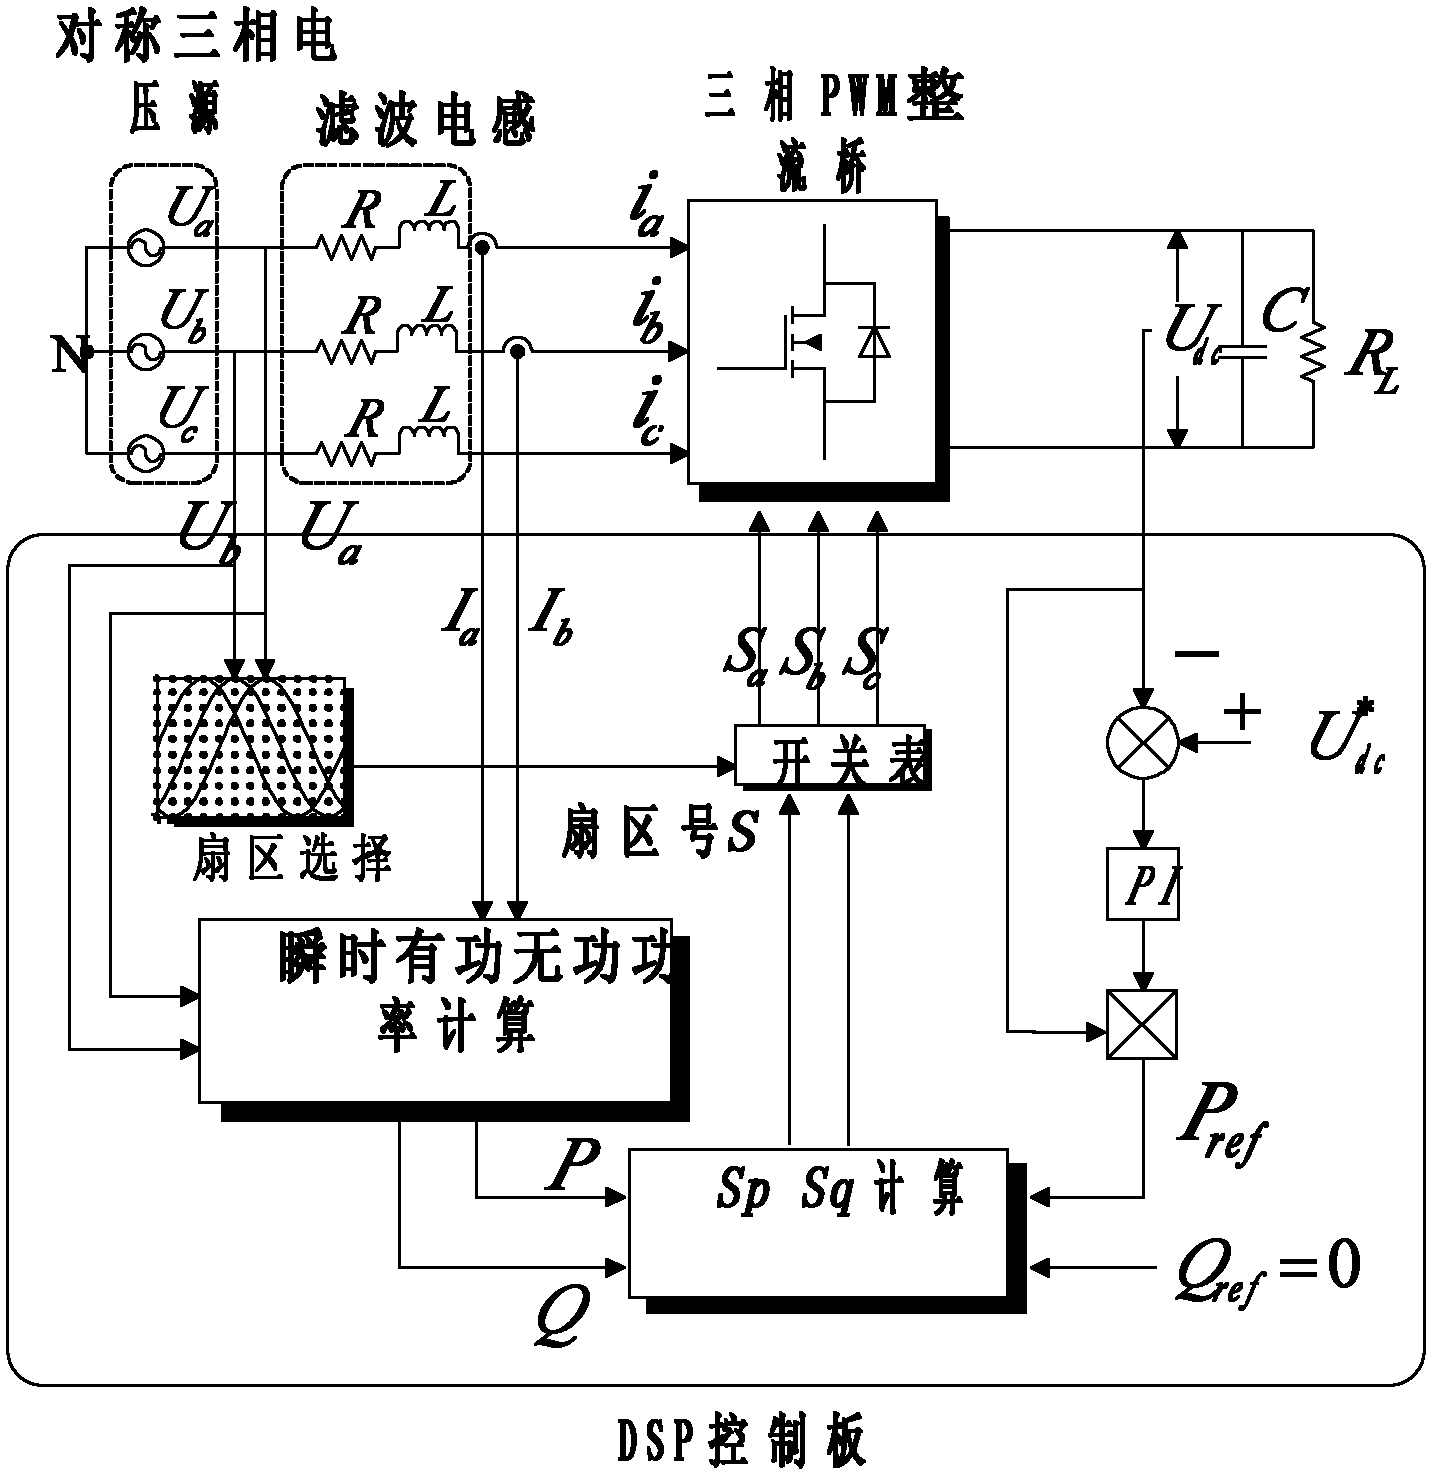 Direct power control method of voltage source PWM (pulse width modulation) rectifier system